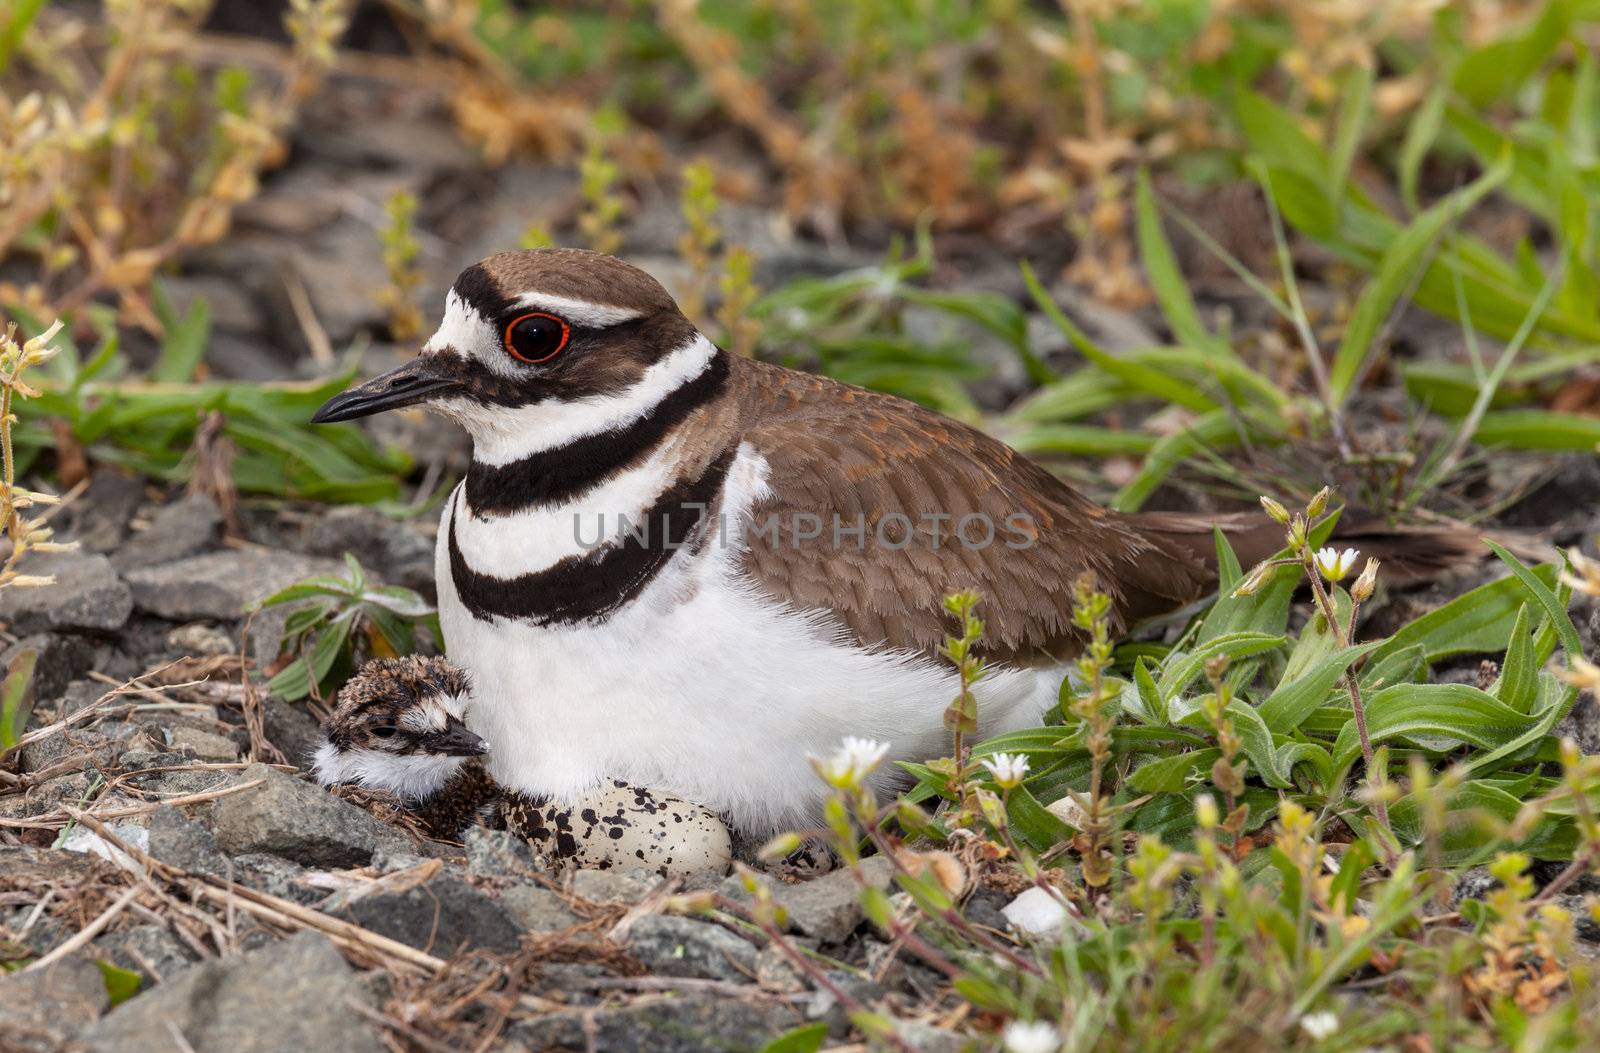 Close up shot of Killdeer bird at nesting time sitting with chicks and eggs on nest